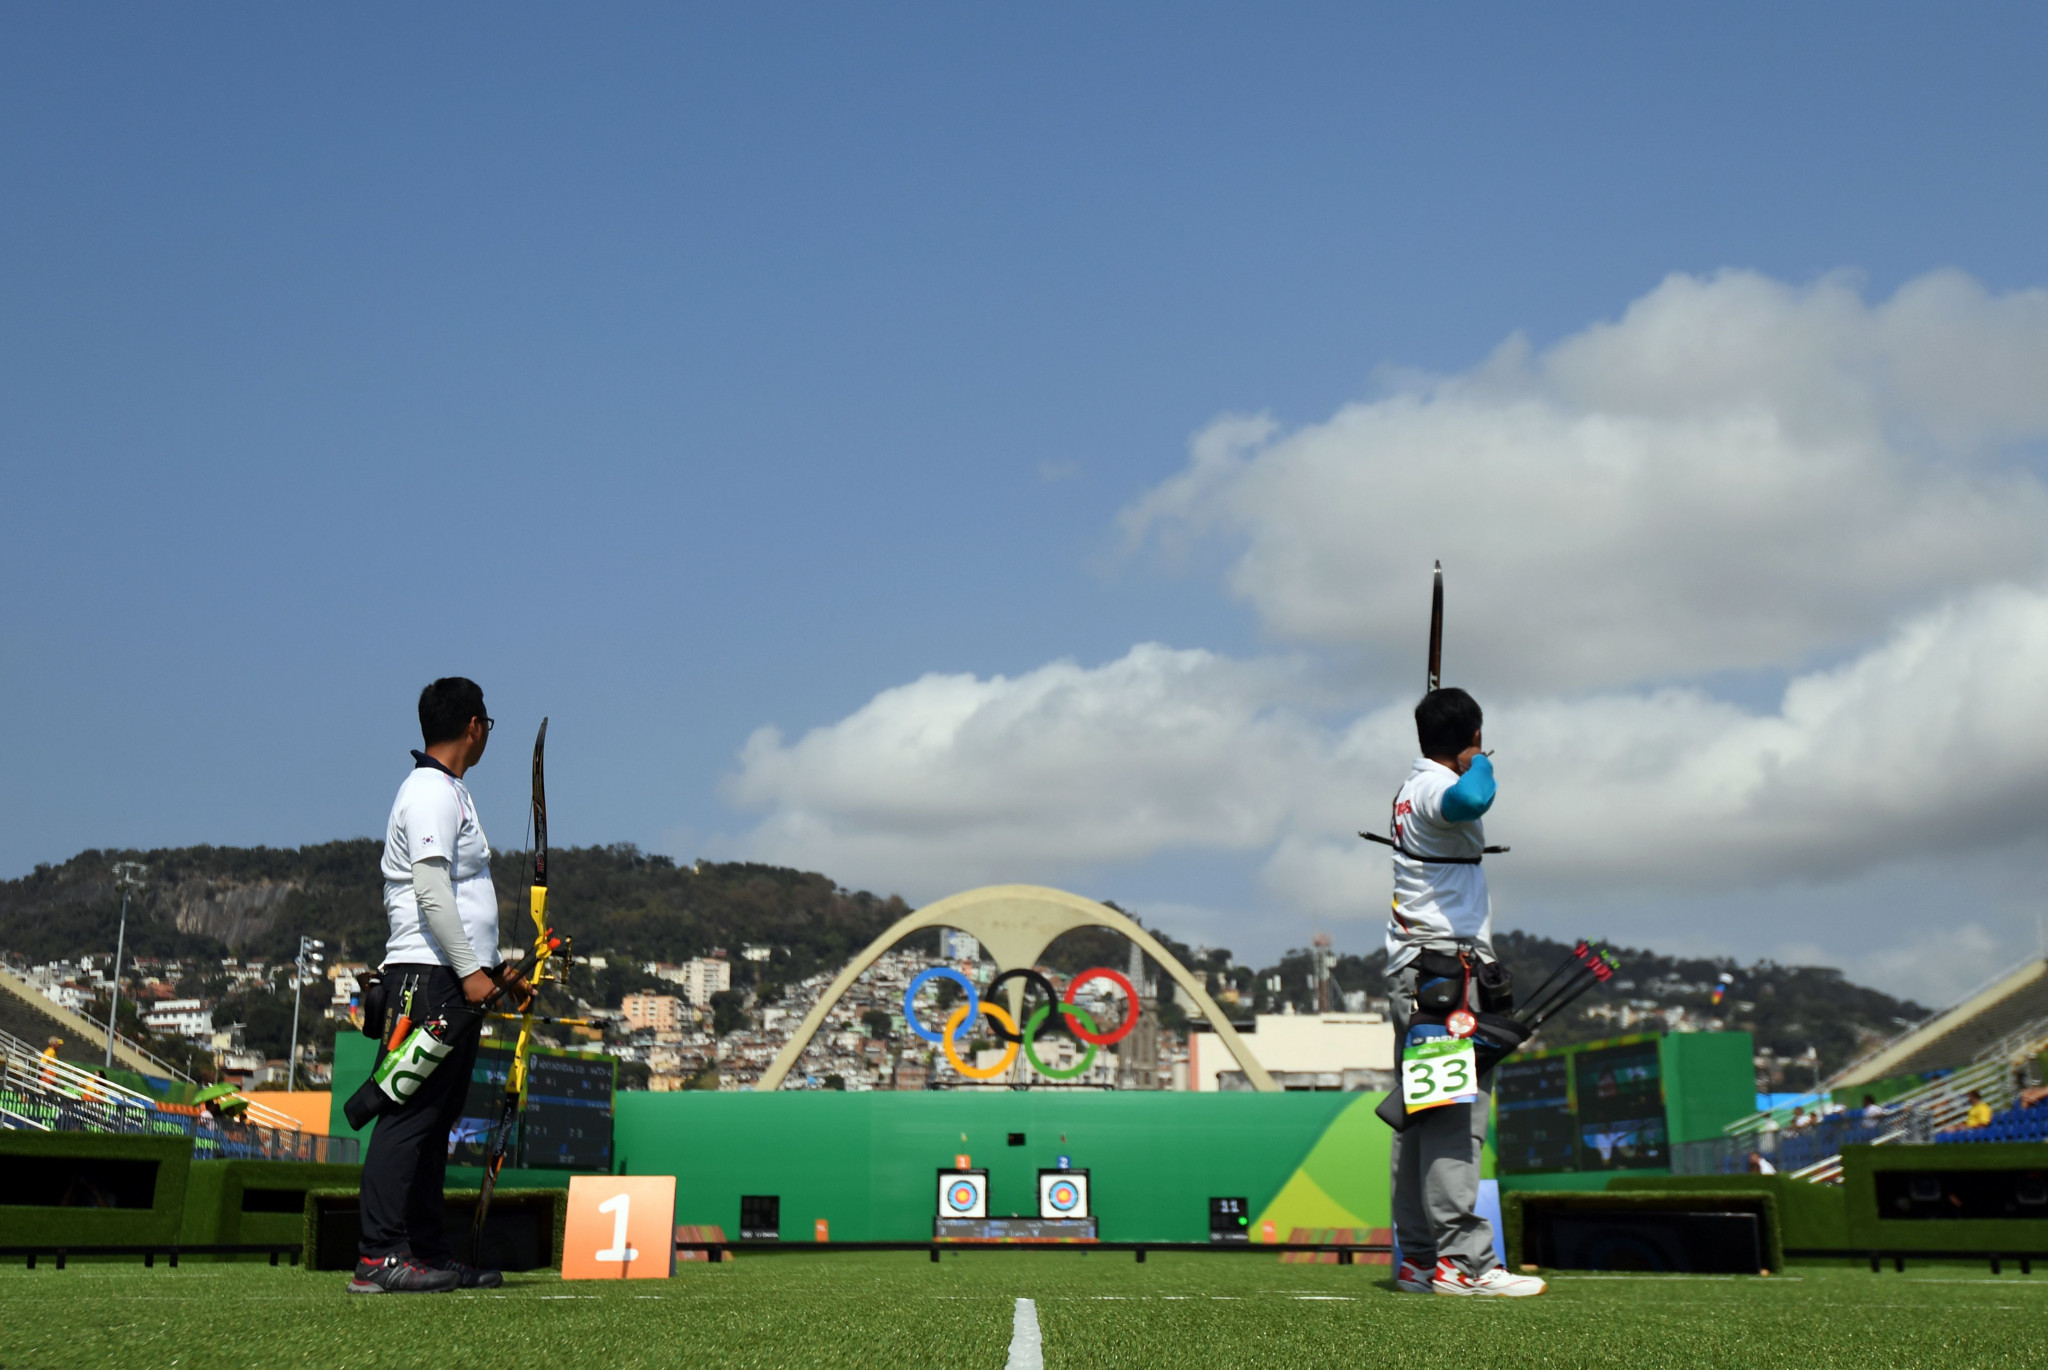 A total of 56 countries competed in archery at Rio 2016 ©Getty Images